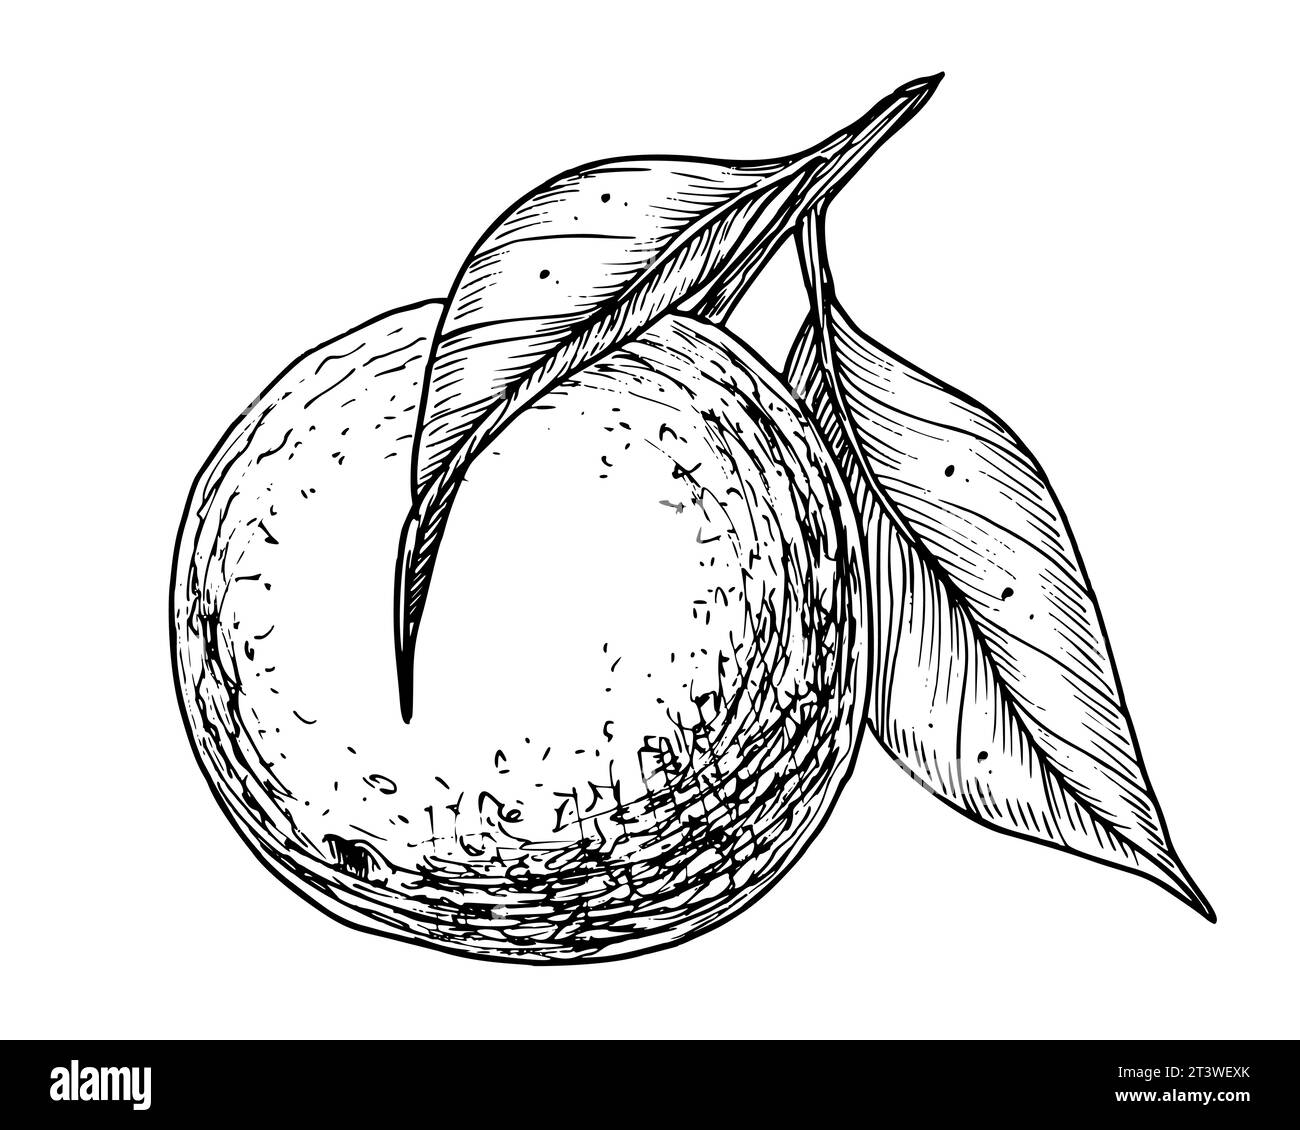 Orange Fruit Branch with leaves. Hand drawn linear vector illustration of mandarin or tangerine. Drawing of clementine tree for food label. Engraved black sketch on white for icon or logo. Stock Vector